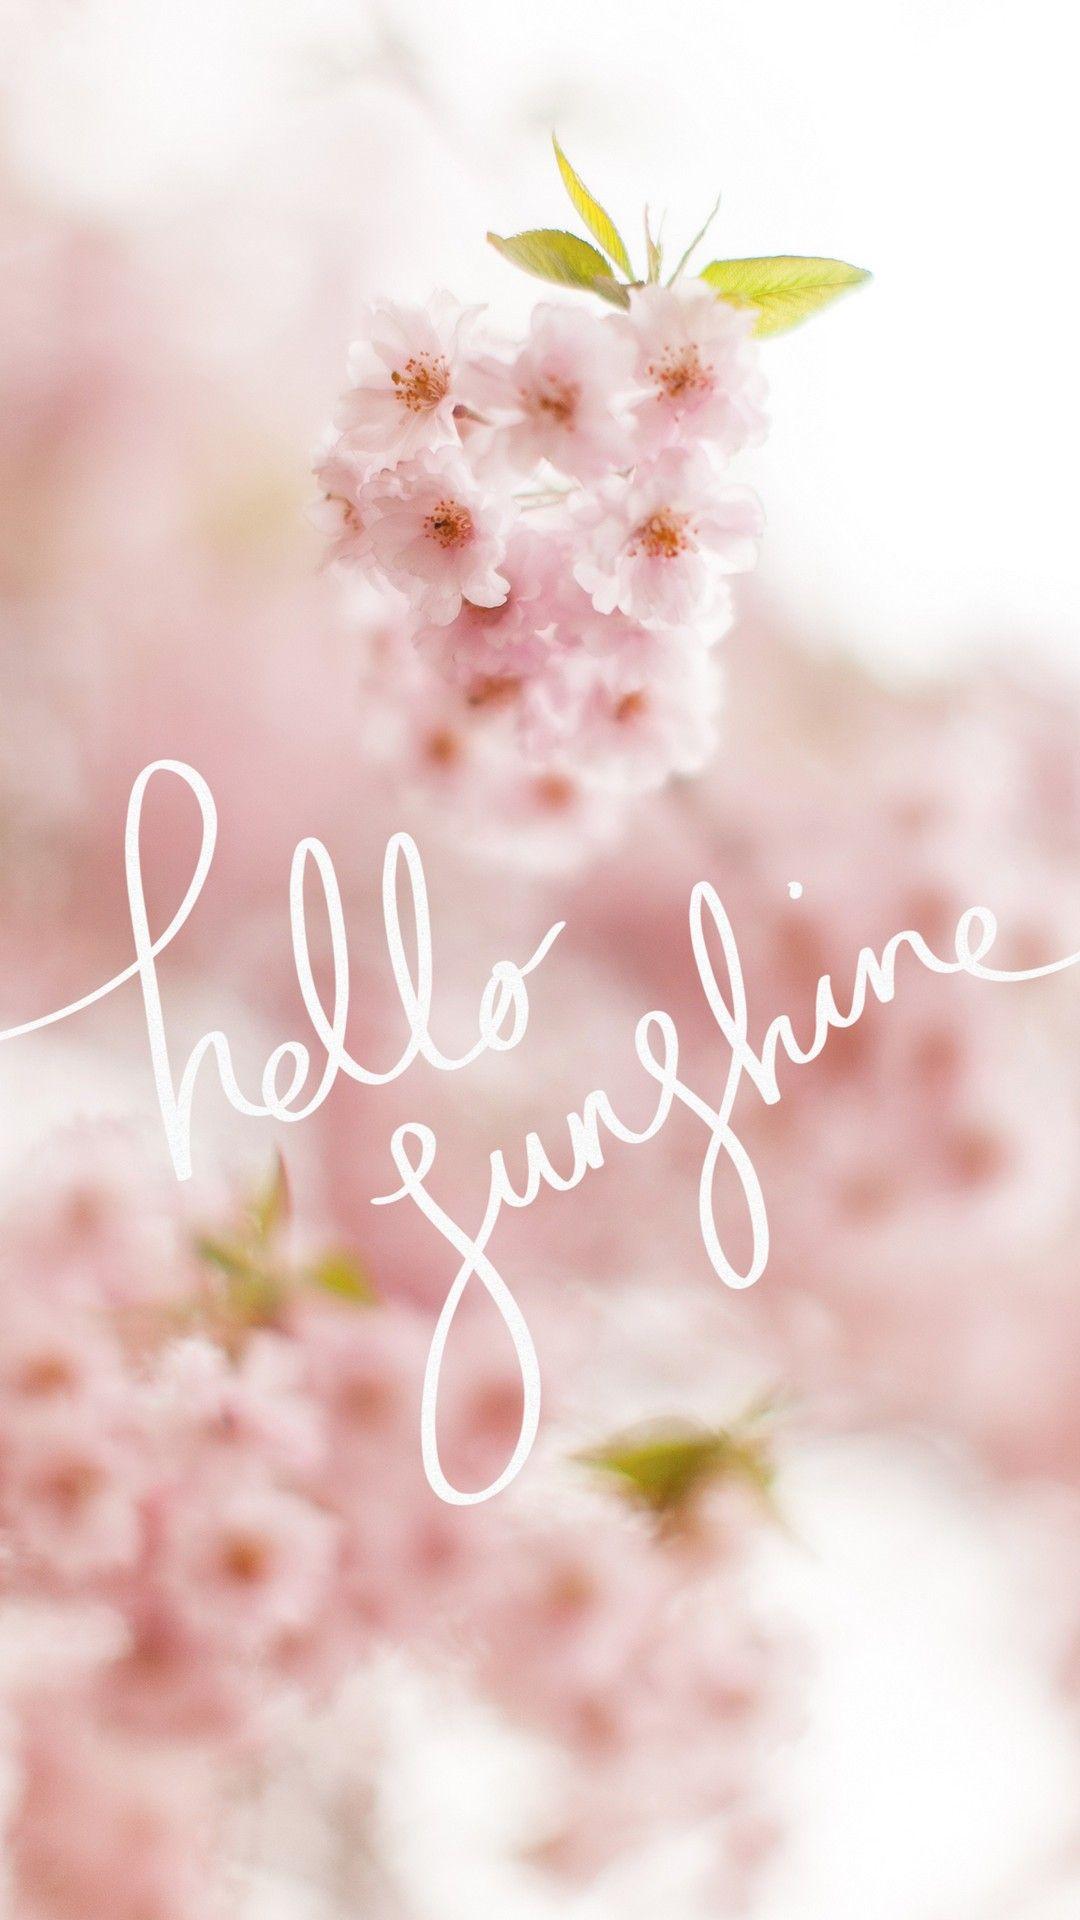 Girly Spring Wallpapers - Top Free Girly Spring Backgrounds ...